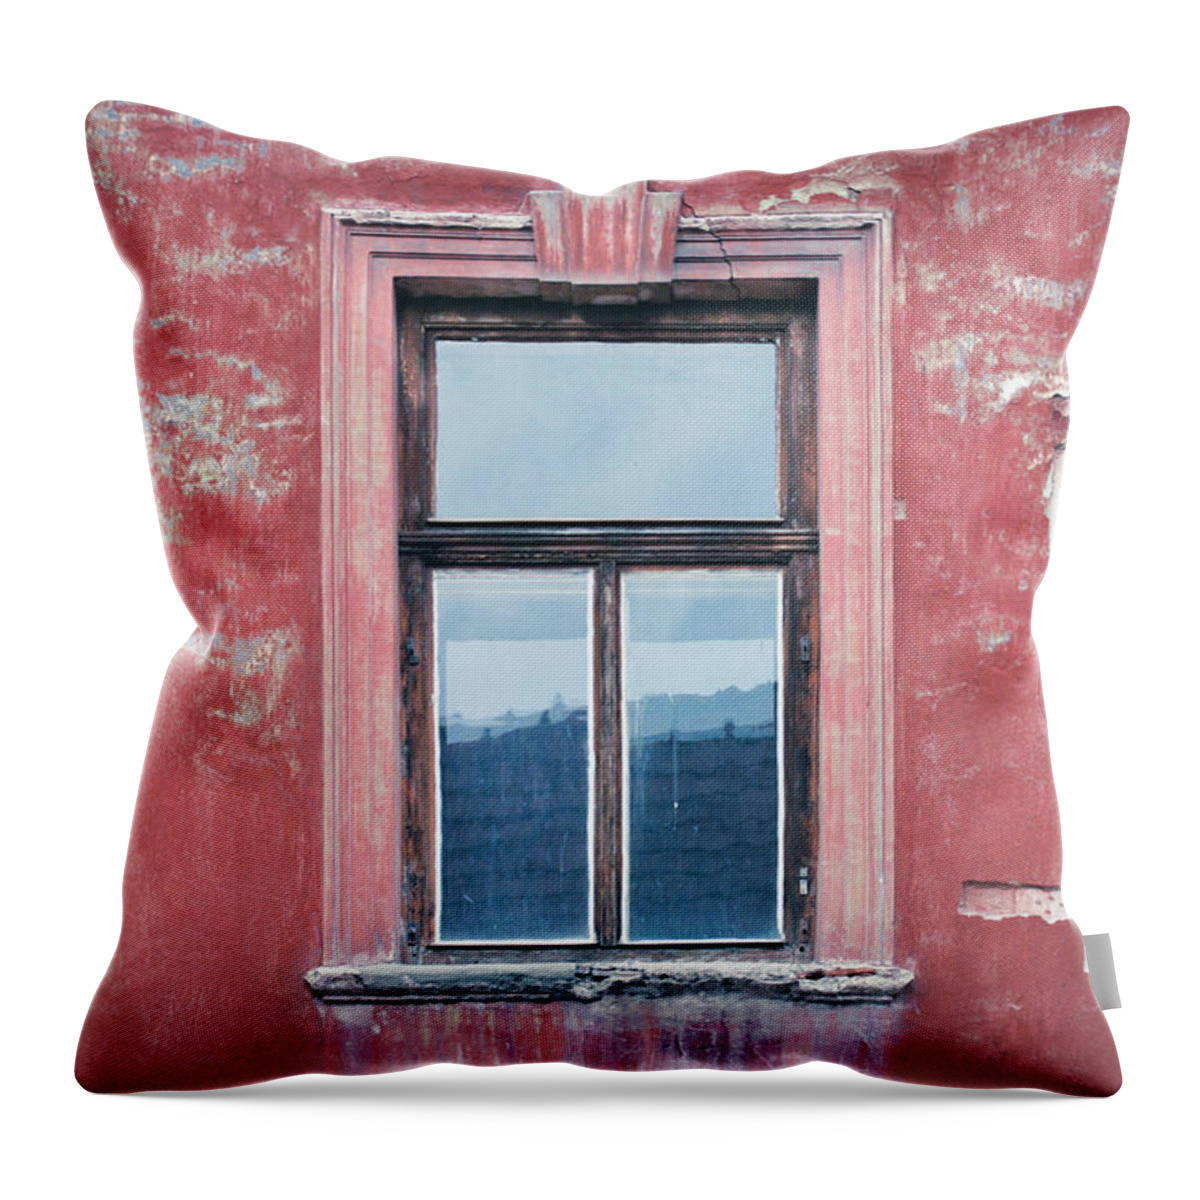 Tranquility Throw Pillow featuring the photograph Window, Plaster, Unrenovated Red House by By Dornveek Markkstyrn